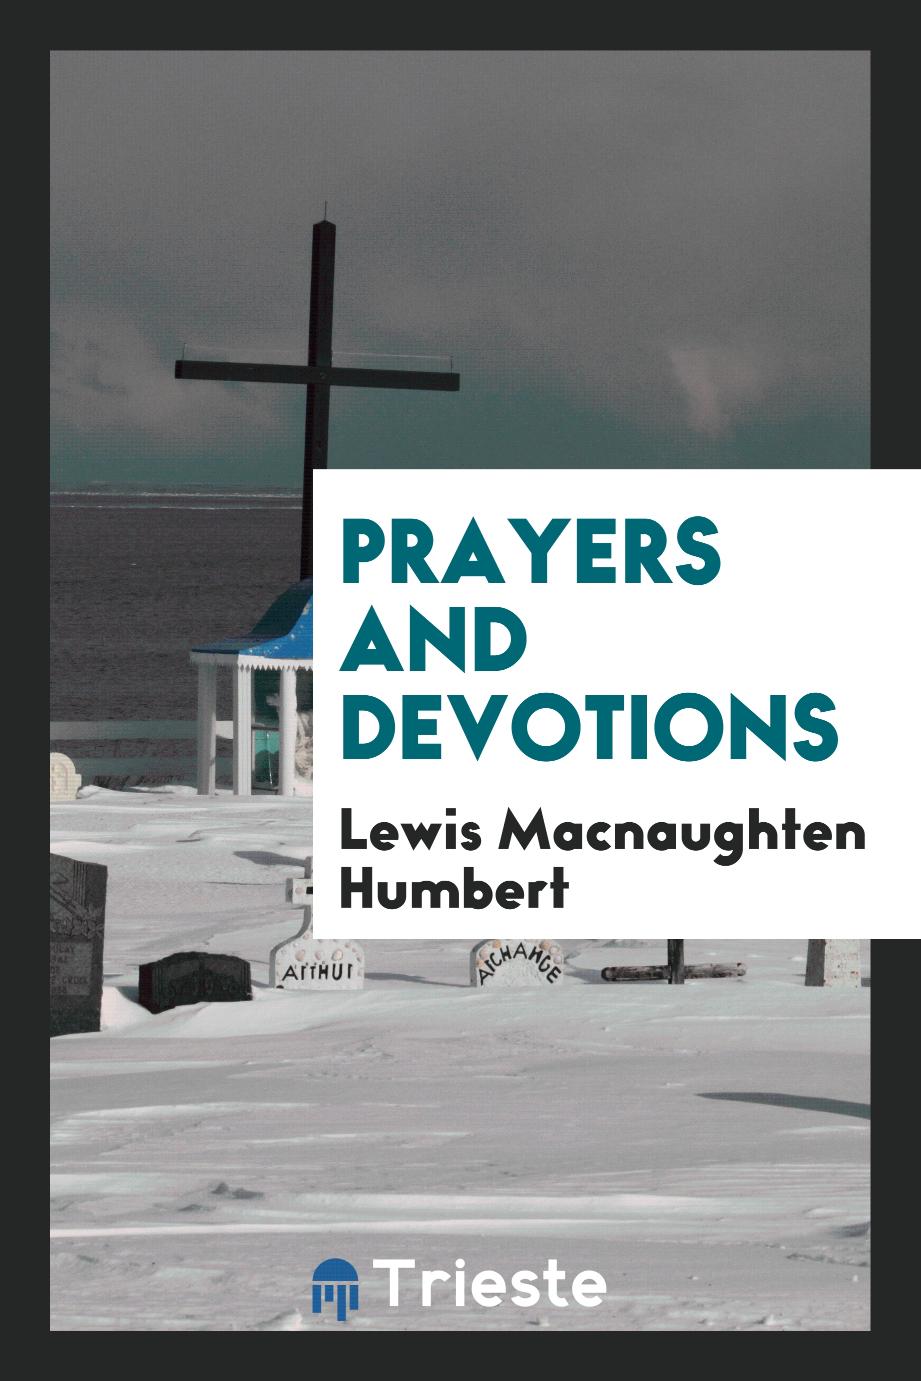 Prayers and devotions